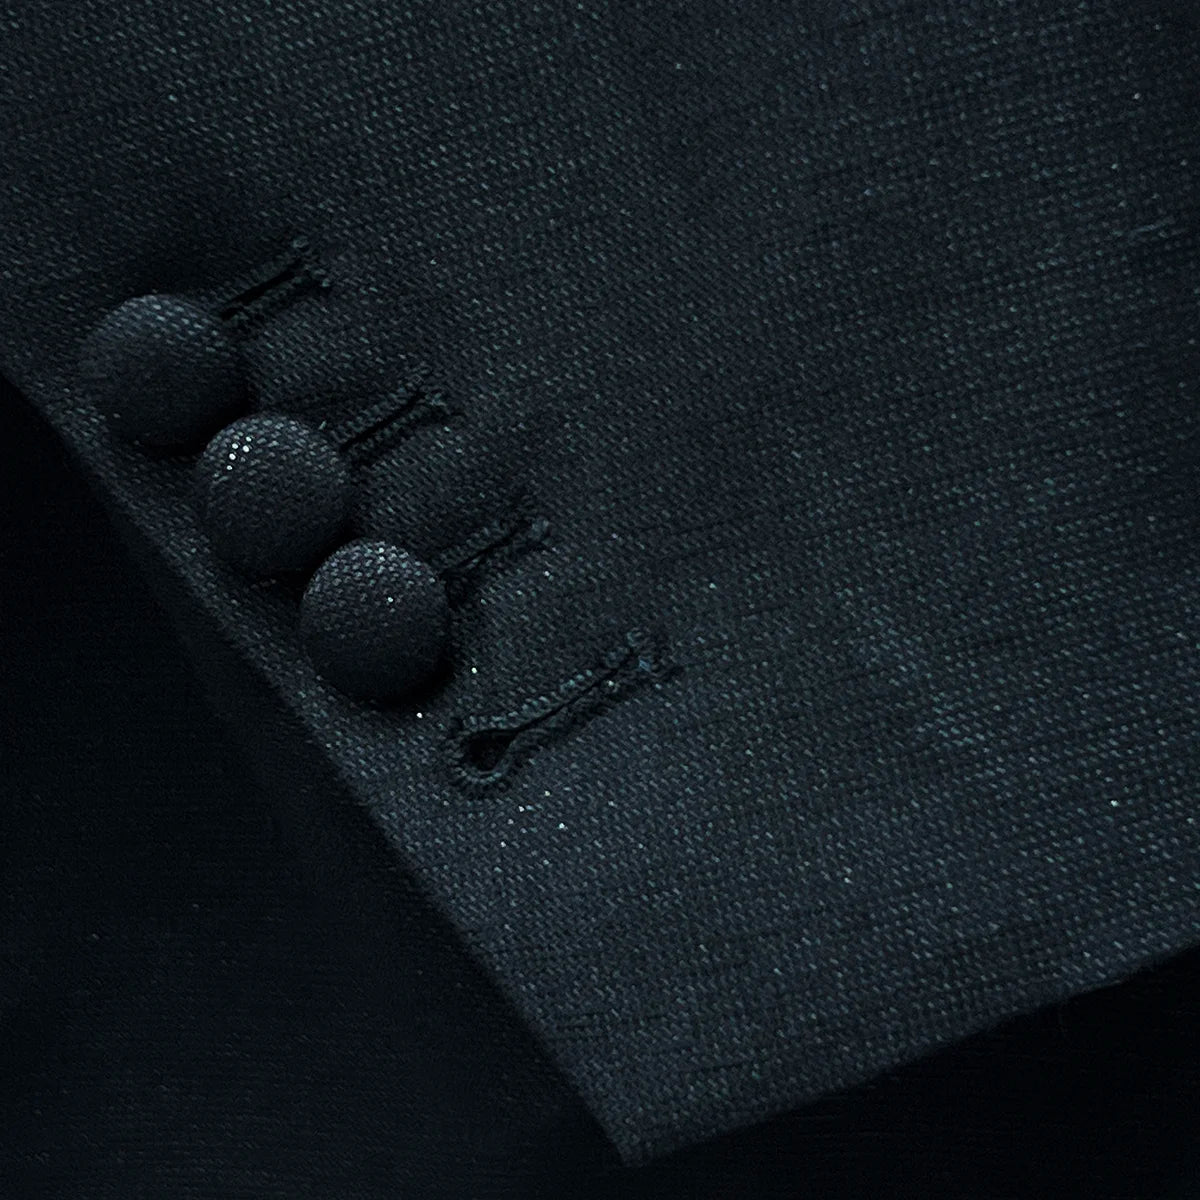 Functional working buttonholes on the sleeve of the westwood hart men's shiny black glitter tuxedo jacket, a hallmark of quality formalwear.